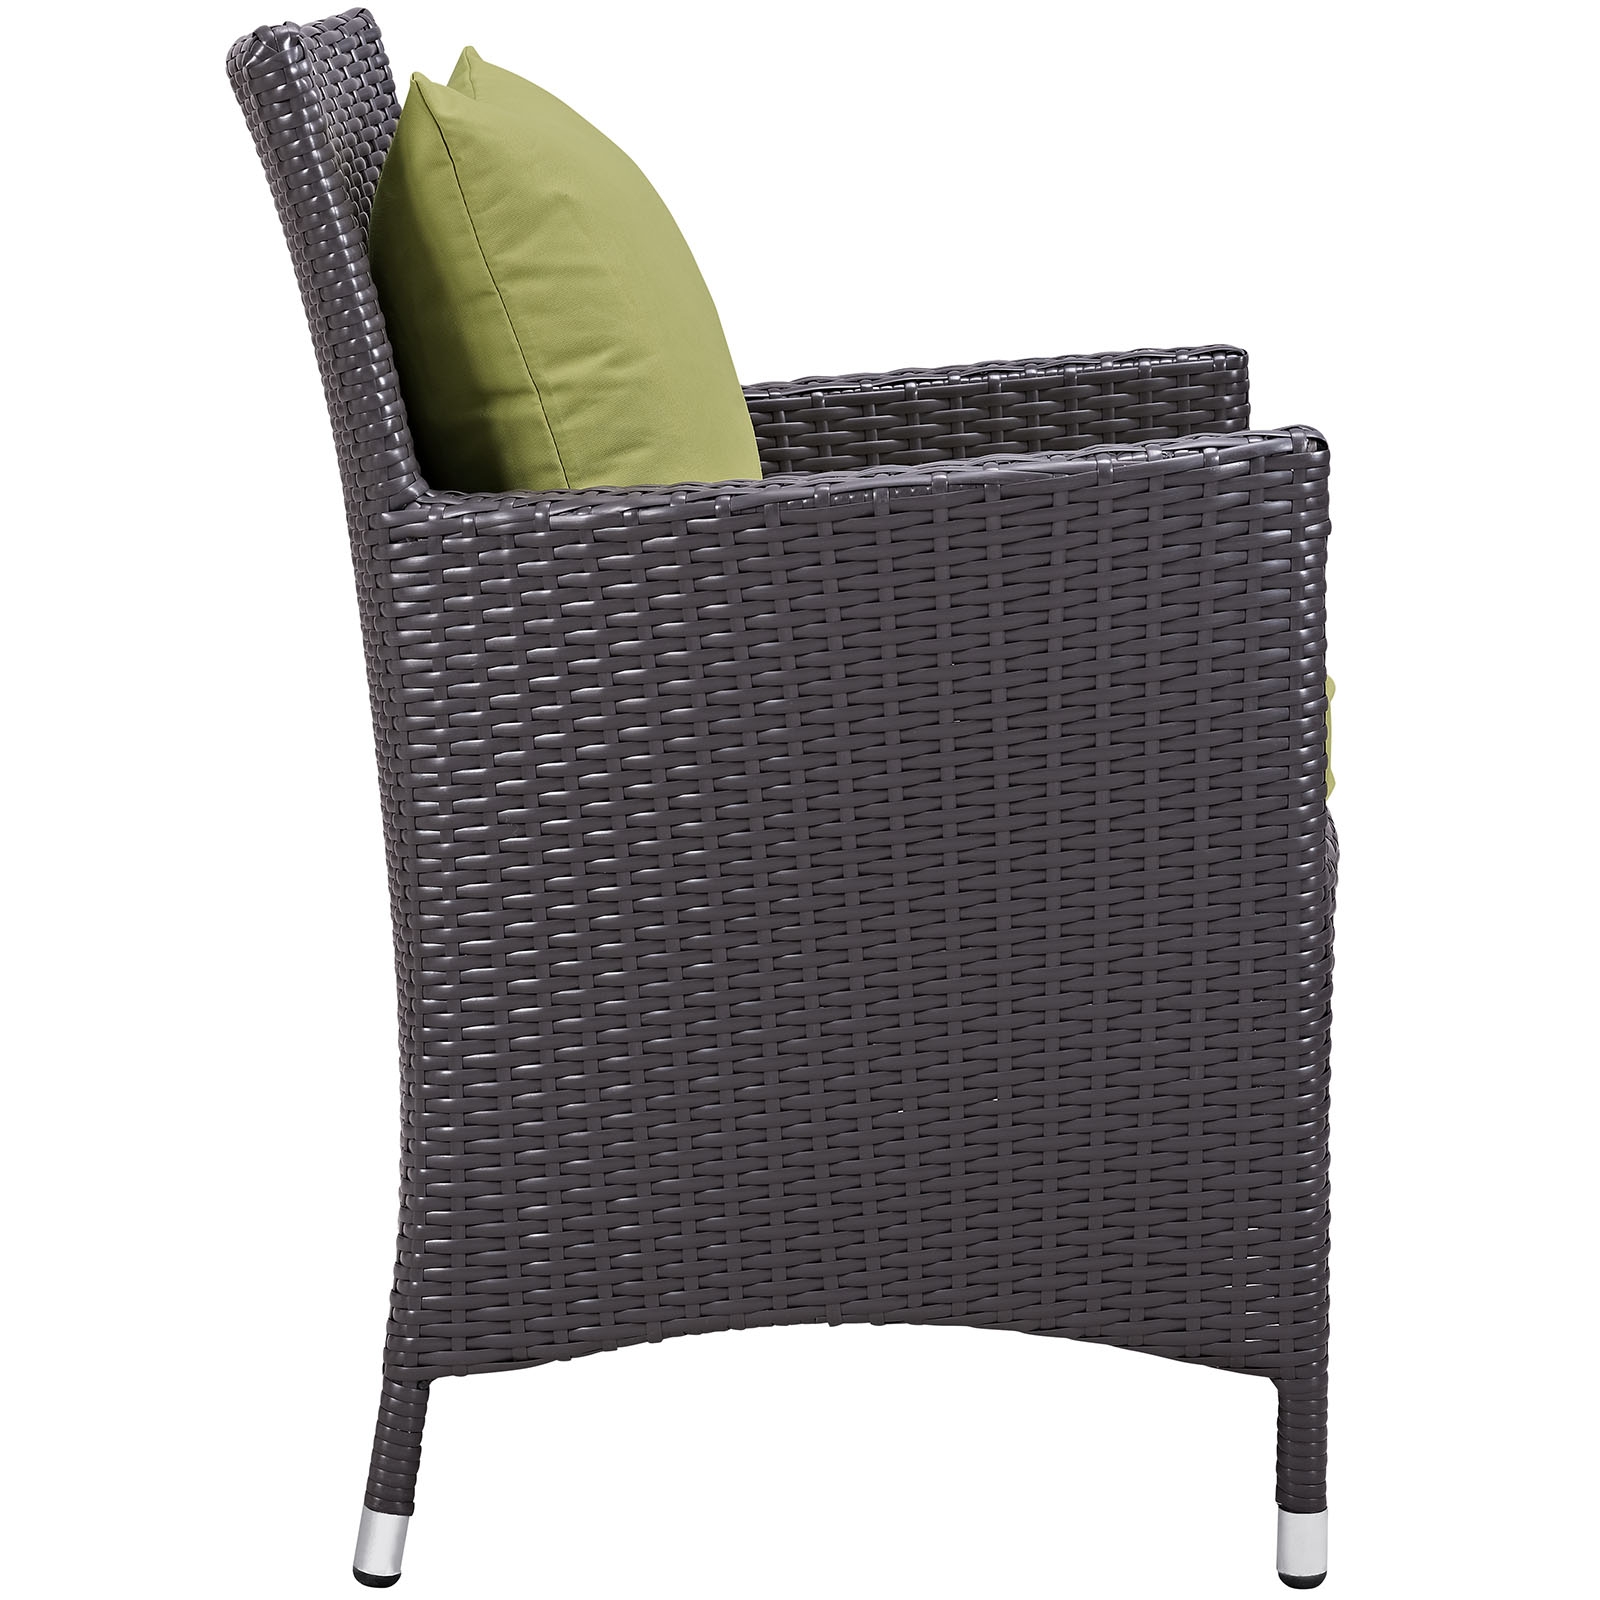 Rattan bistro chair side view